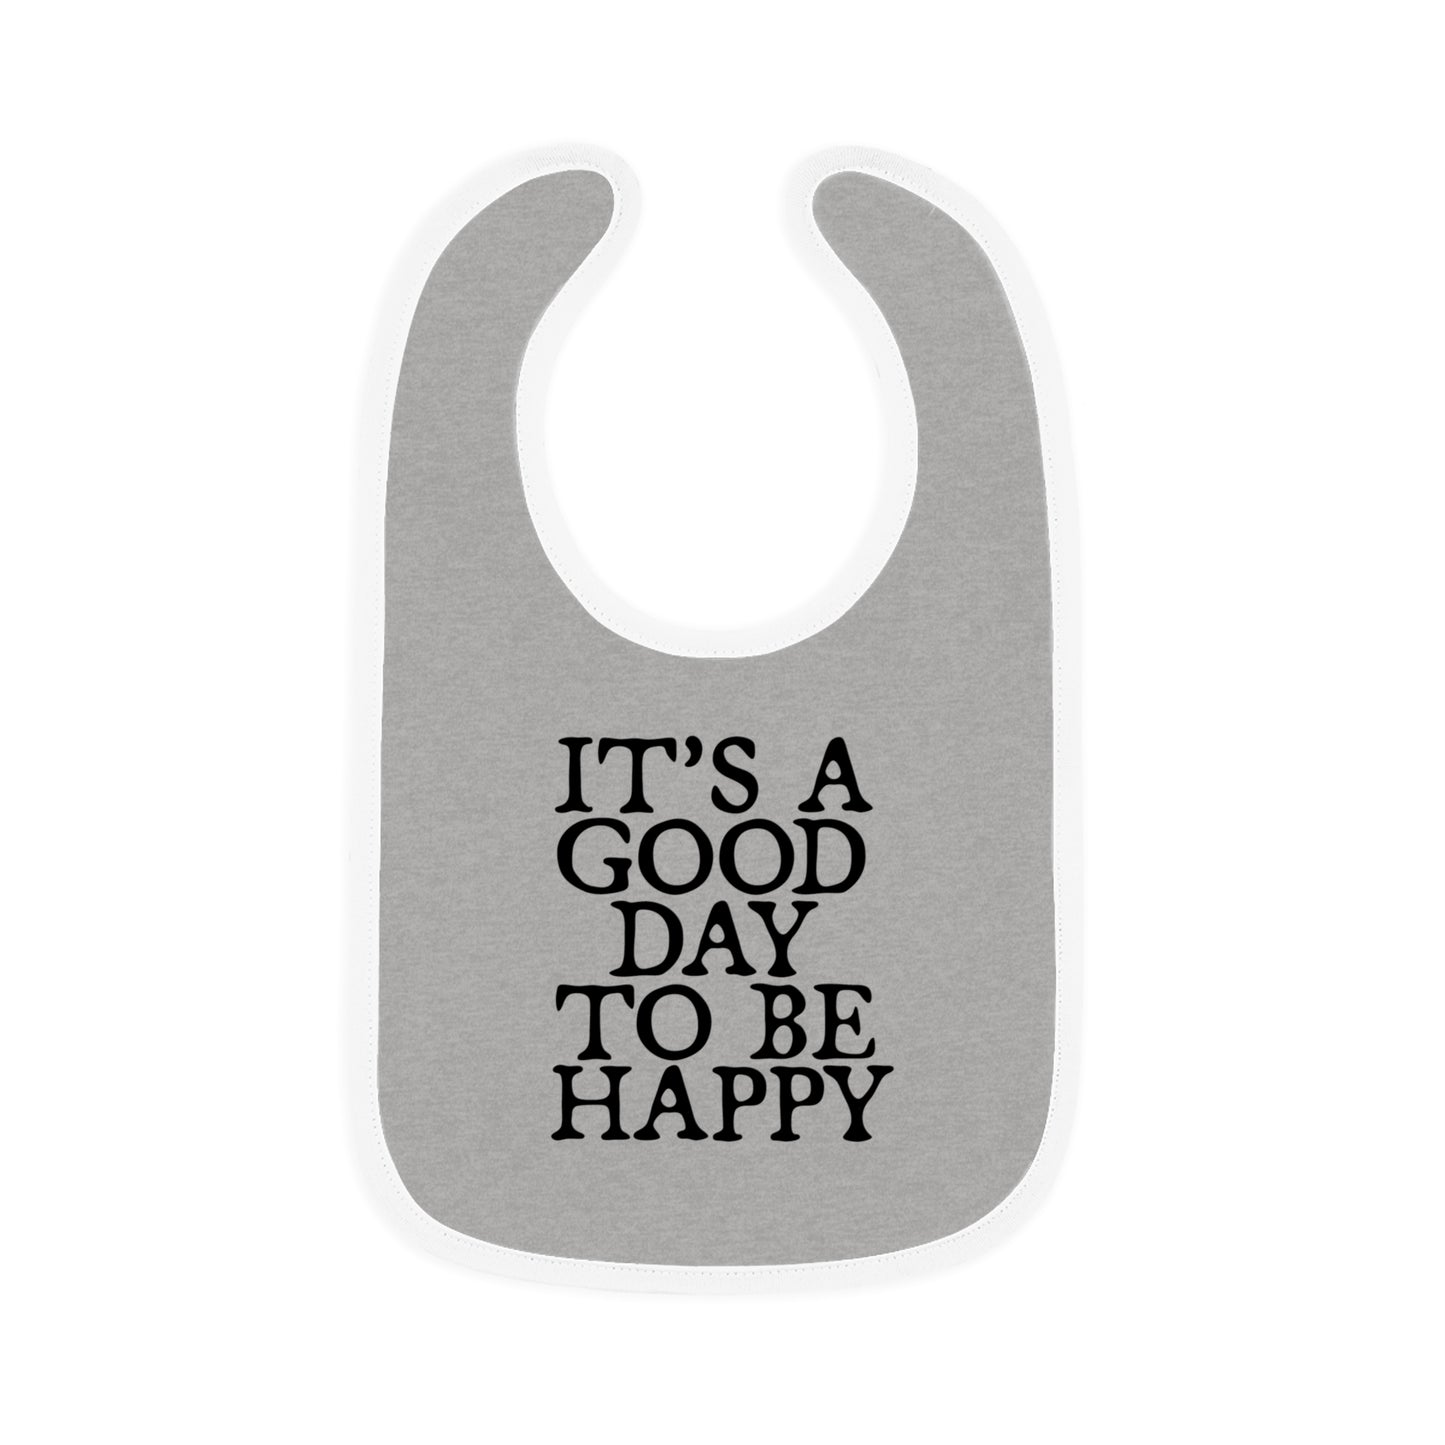 It's a Good Day to be Happy - Baby Contrast Trim Jersey Bib